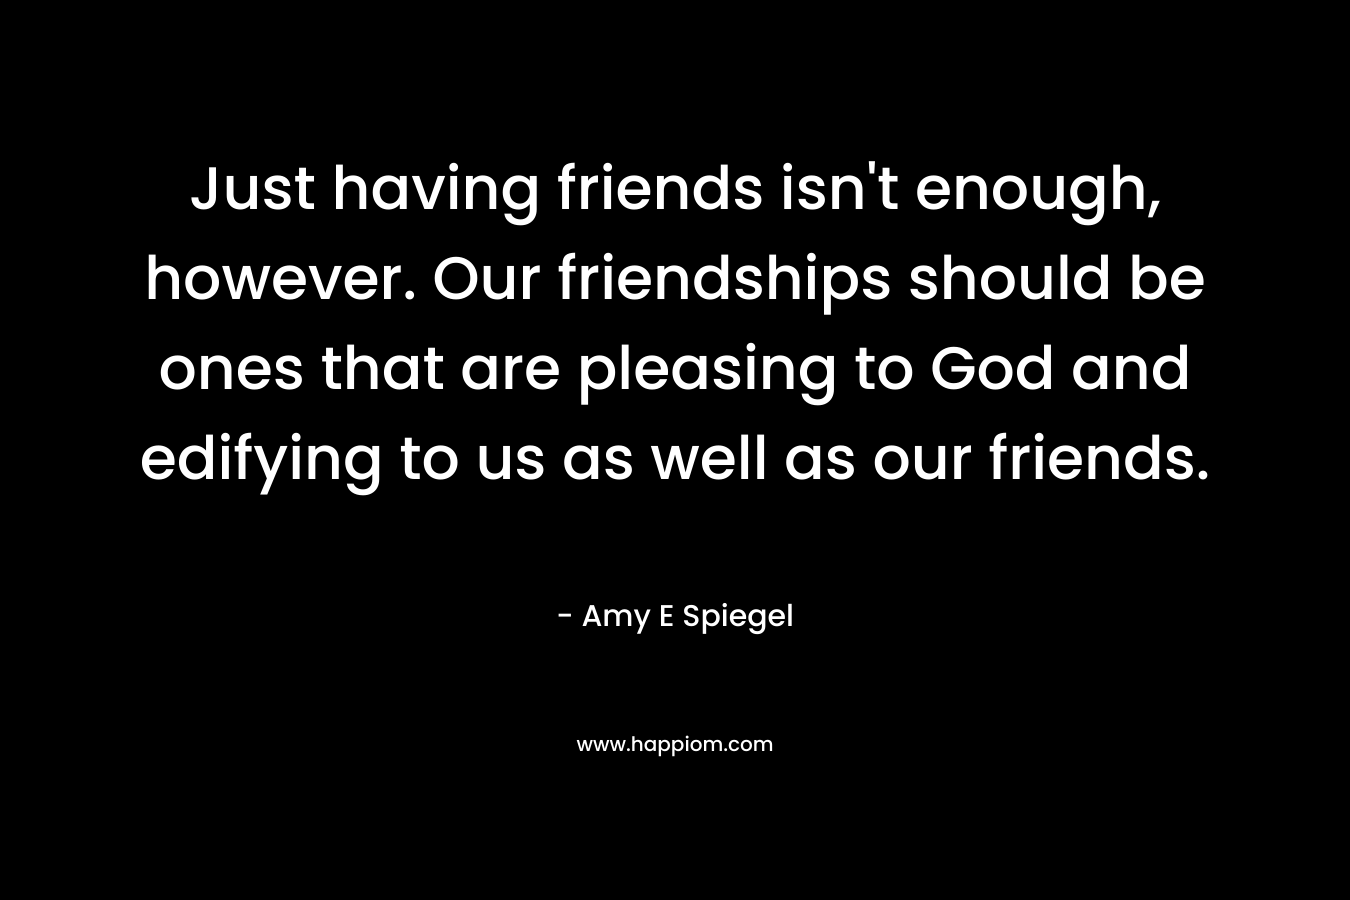 Just having friends isn't enough, however. Our friendships should be ones that are pleasing to God and edifying to us as well as our friends.